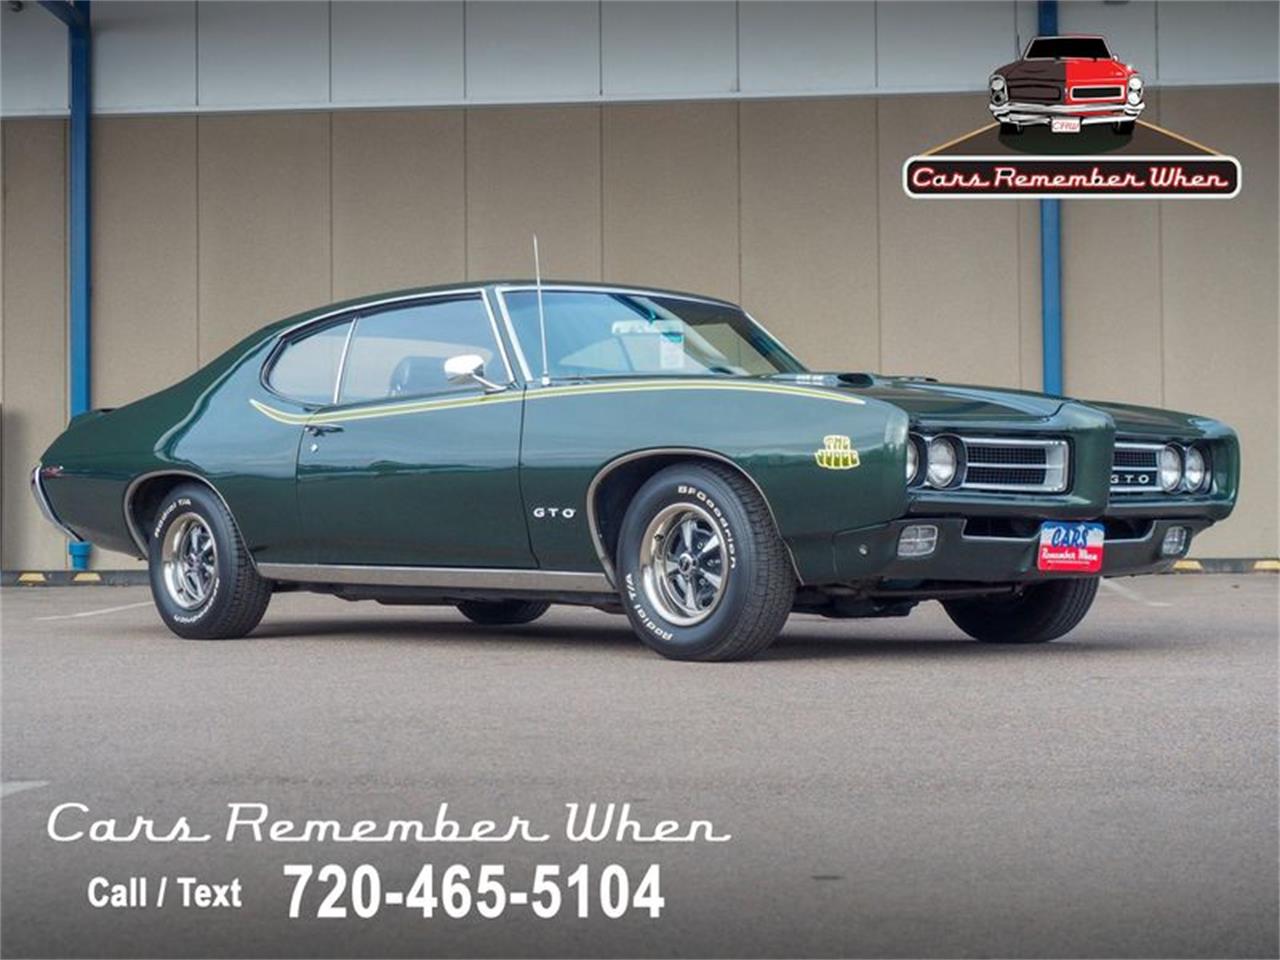 For Sale: 1969 Pontiac GTO in Englewood, Colorado for sale in Englewood, CO